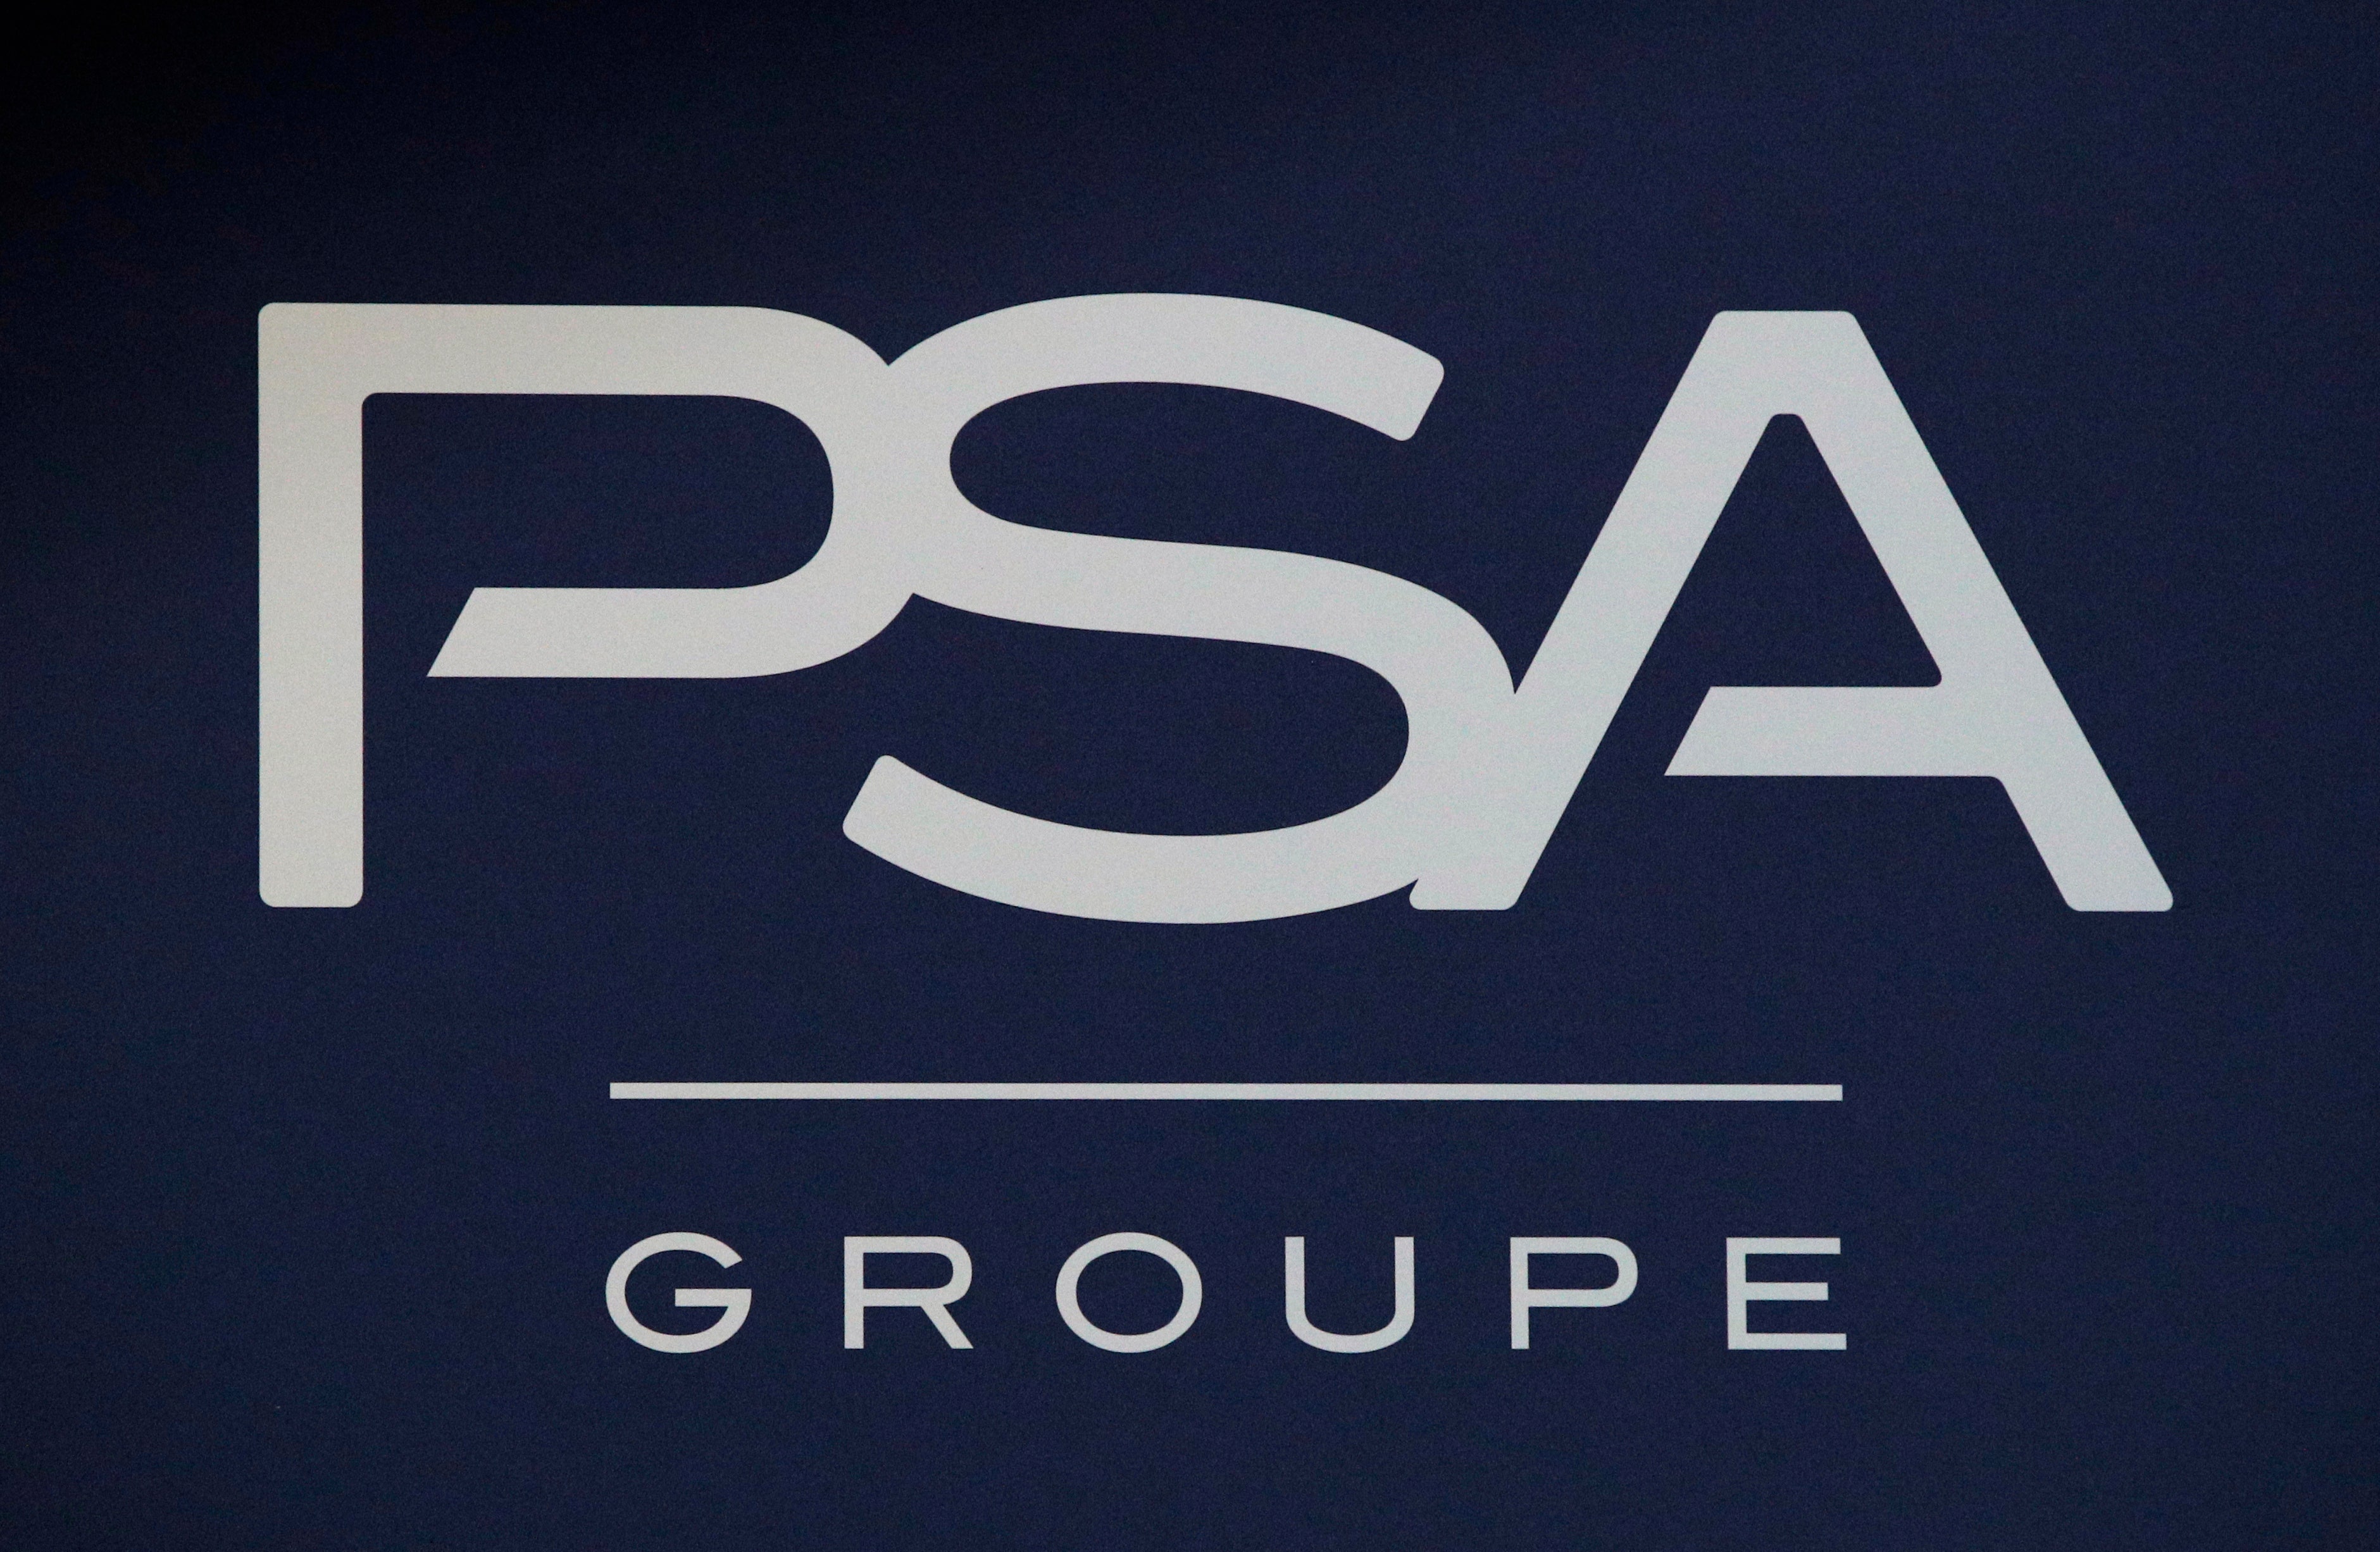 PSA Group shareholders vote to approve merger with Fiat Chrysler